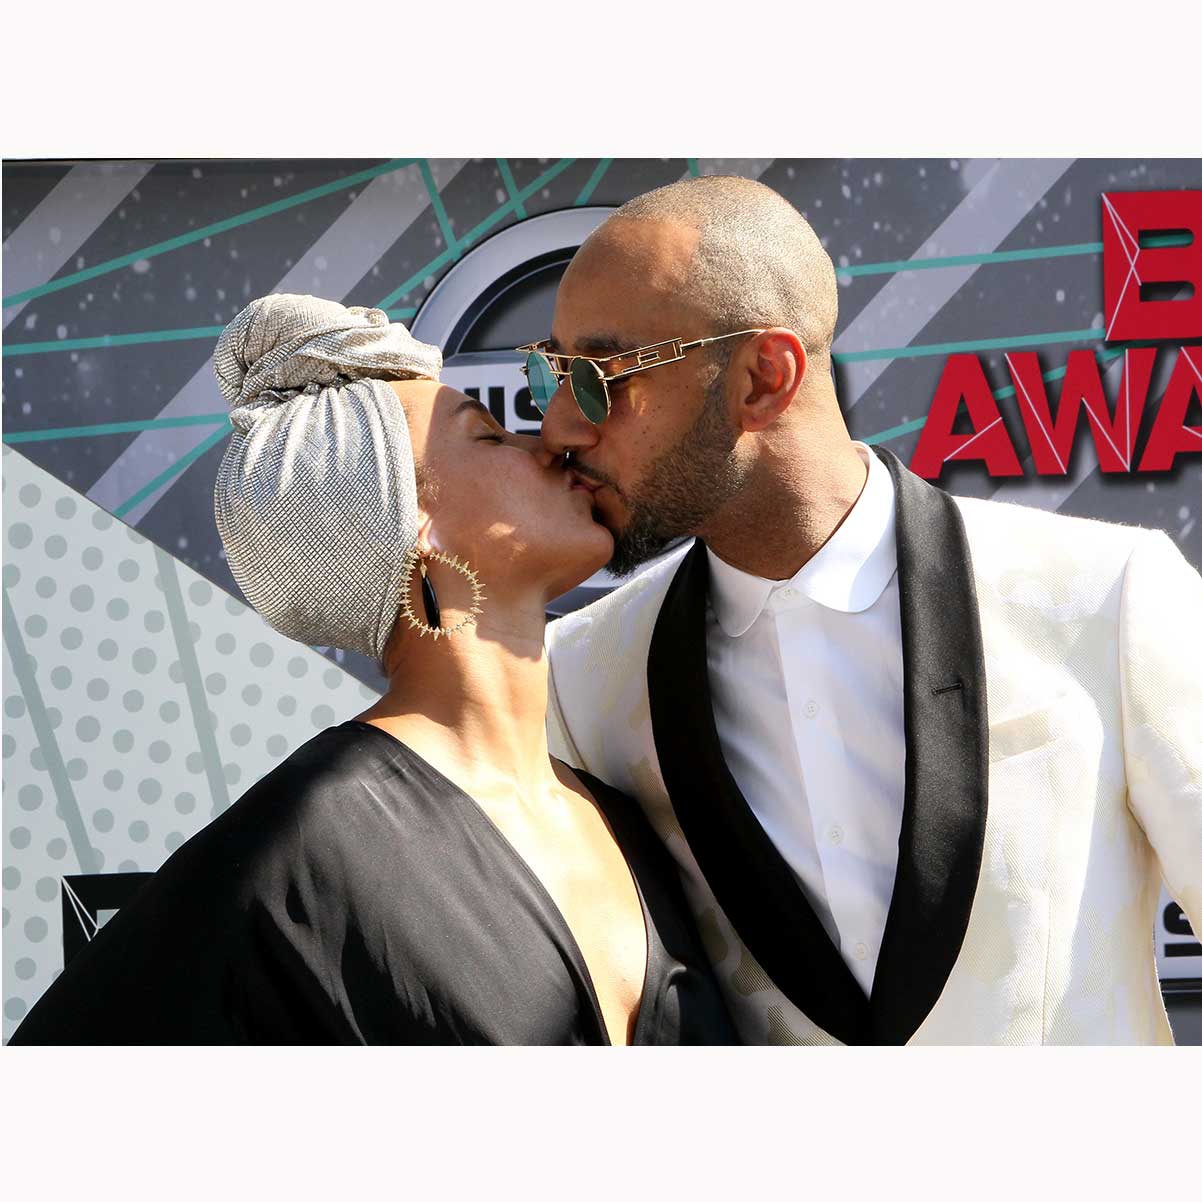 Cute Celebrity Couples Who Spent Date Night at the BET Awards
